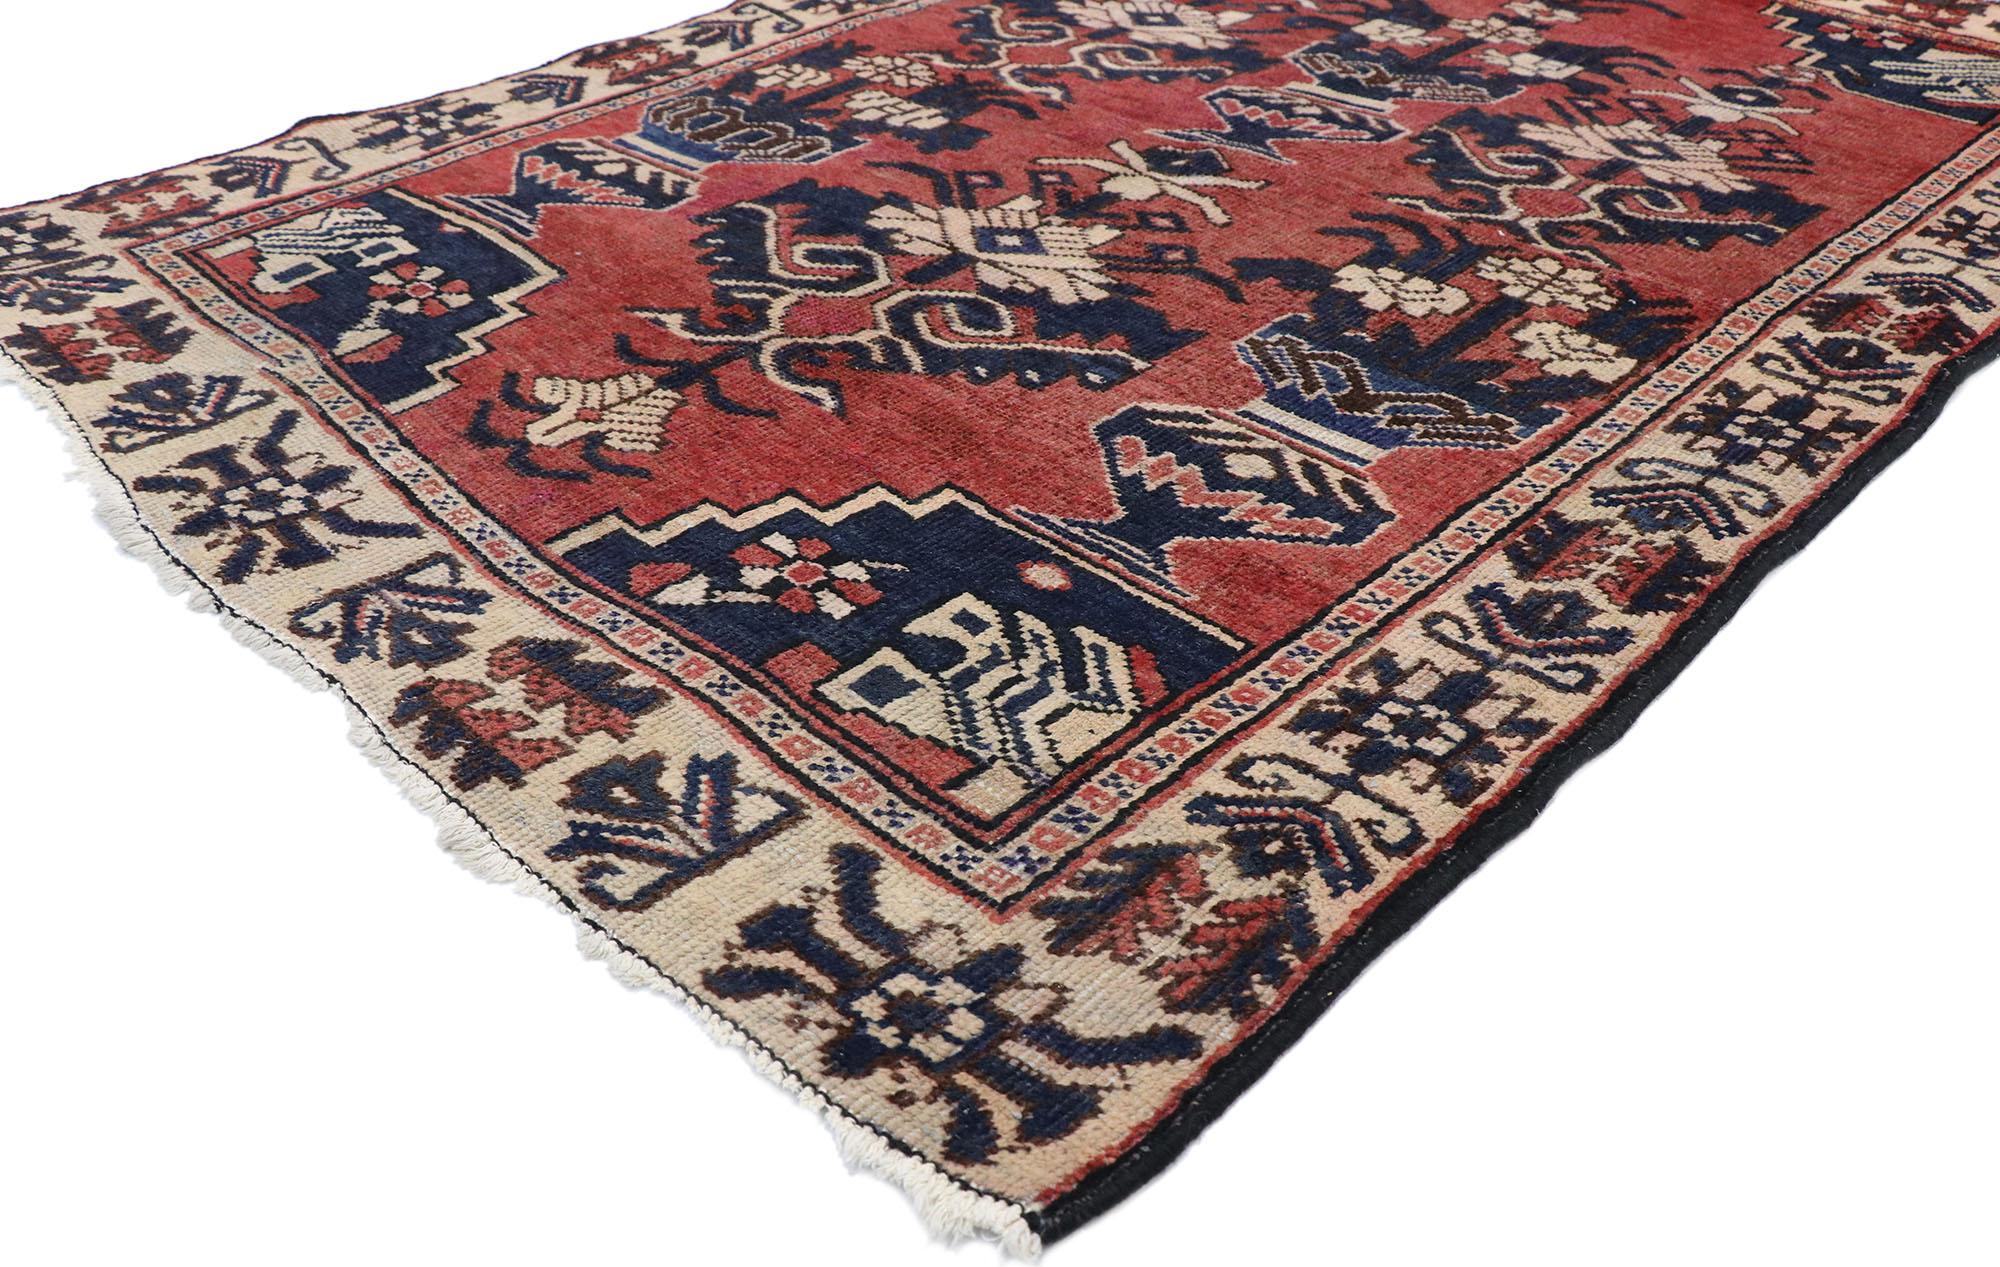 77715 Vintage Persian Bakhtiari Vase Rug with Jacobean Style 04'03 x 06'03. With its red hues and beguiling beauty, this hand-knotted wool vintage Persian Bakhtiari rug will take on a curated lived-in look that feels timeless while imparting a sense